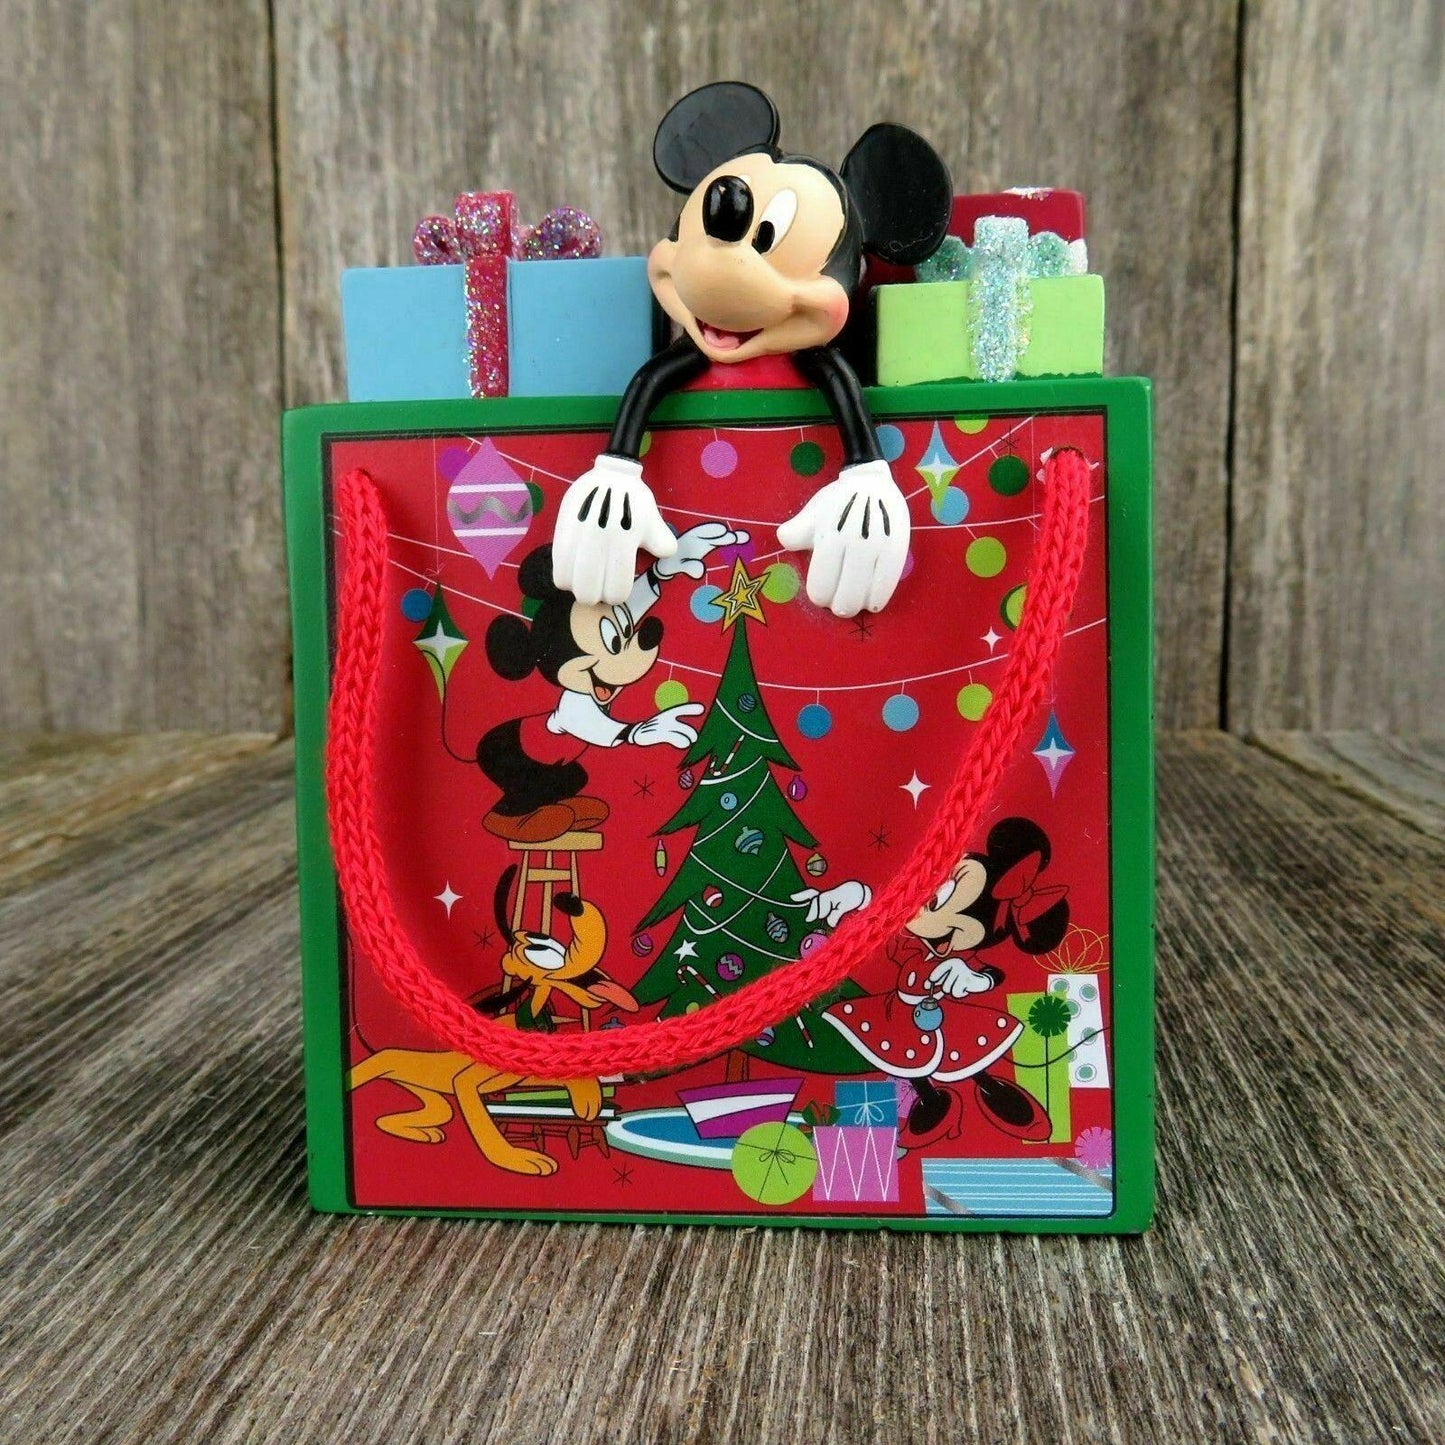 Mickey Mouse Ornament Disney Shopping Gift Bag Sketchbook Christmas Holiday 2014